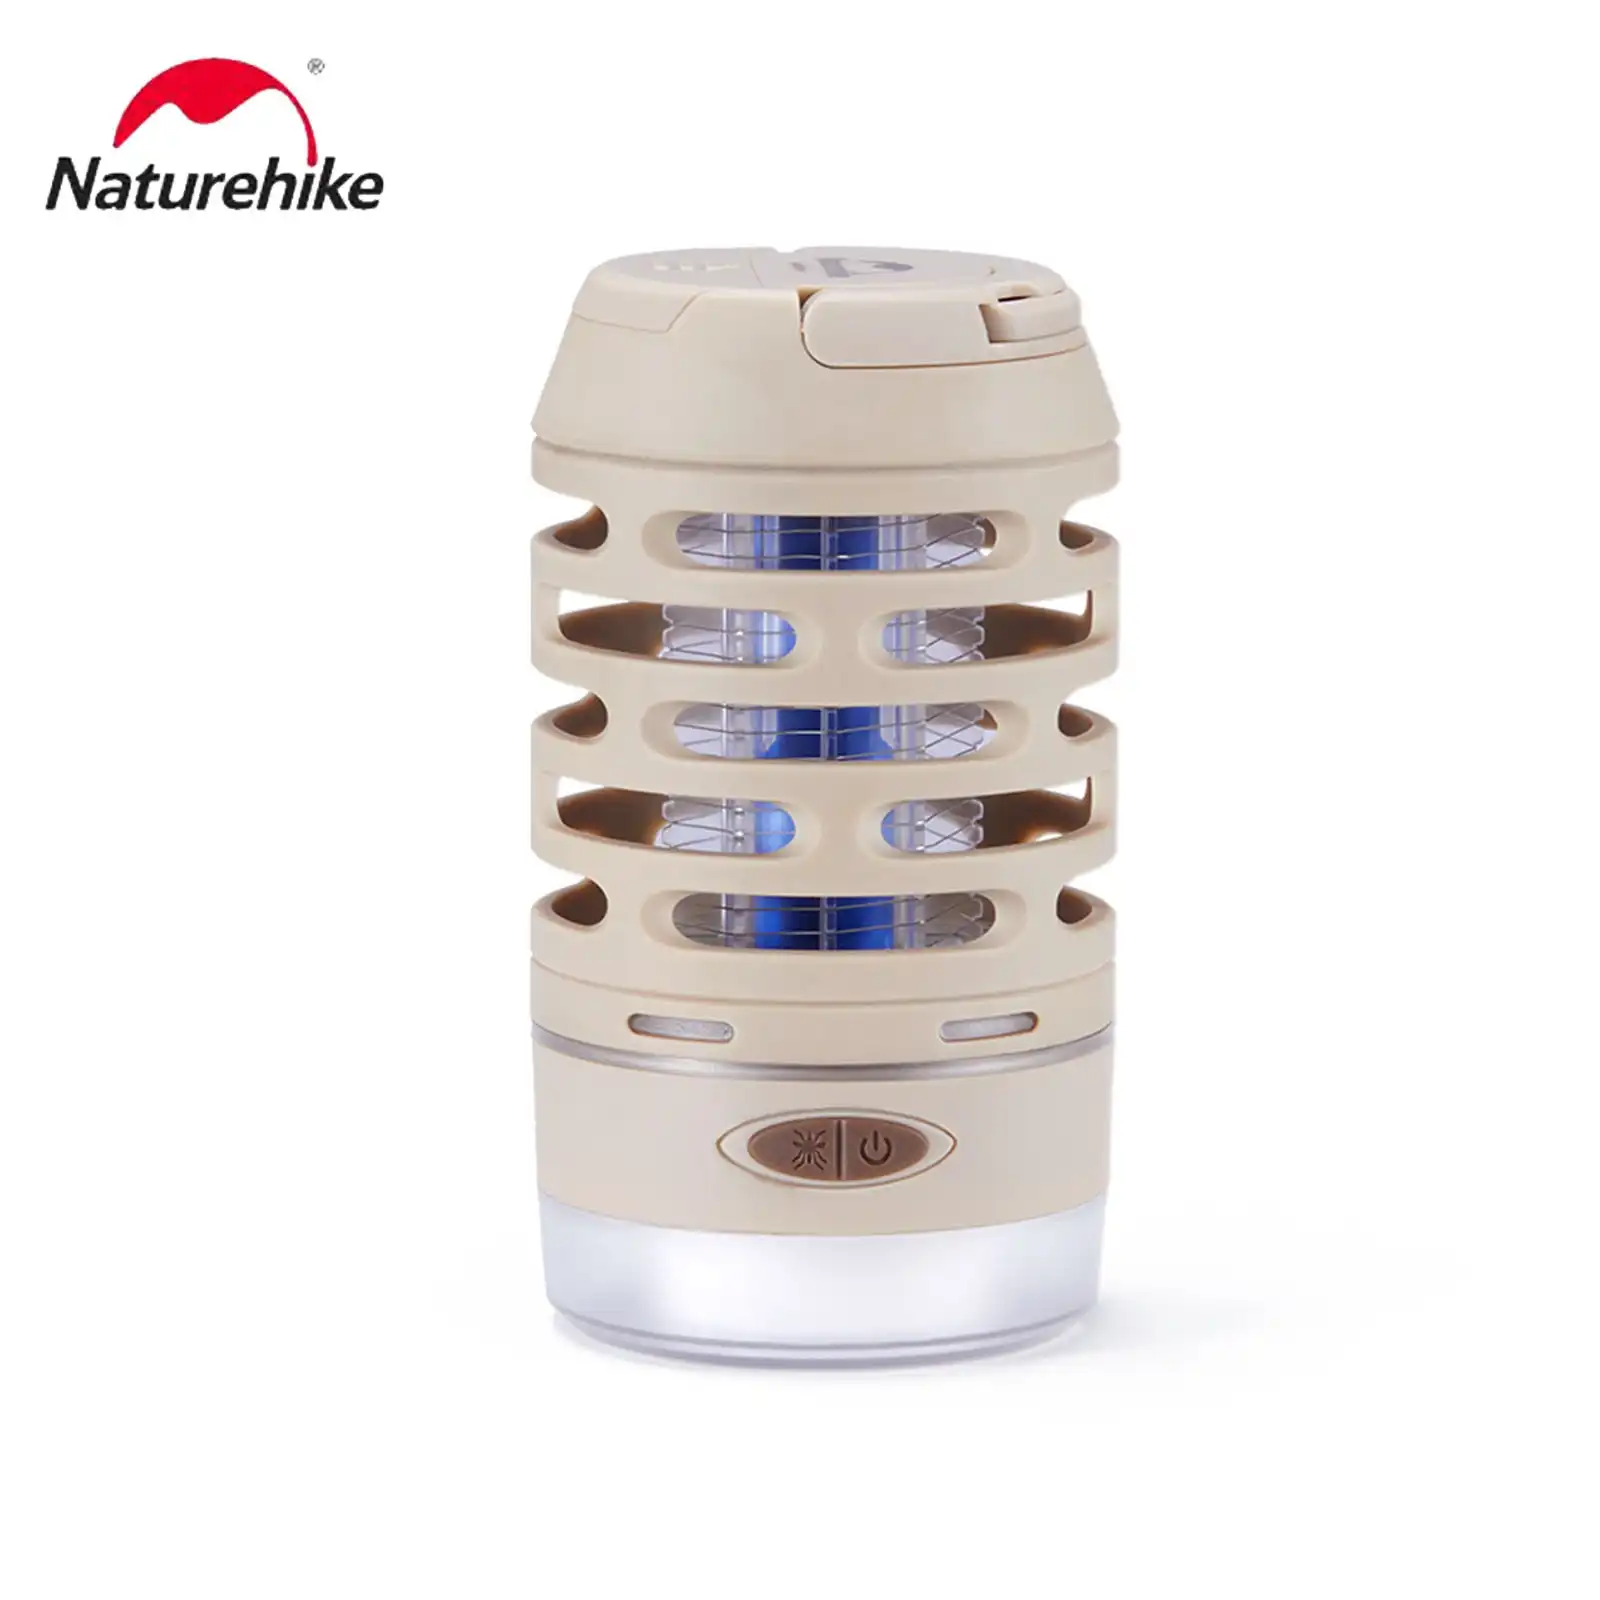 NatureHike Outdoor Electric Shock Mosquito Lamp Insect Repellent Light Waterproof Camping Lights Outdoor Flashlight Tent Light - Khaki